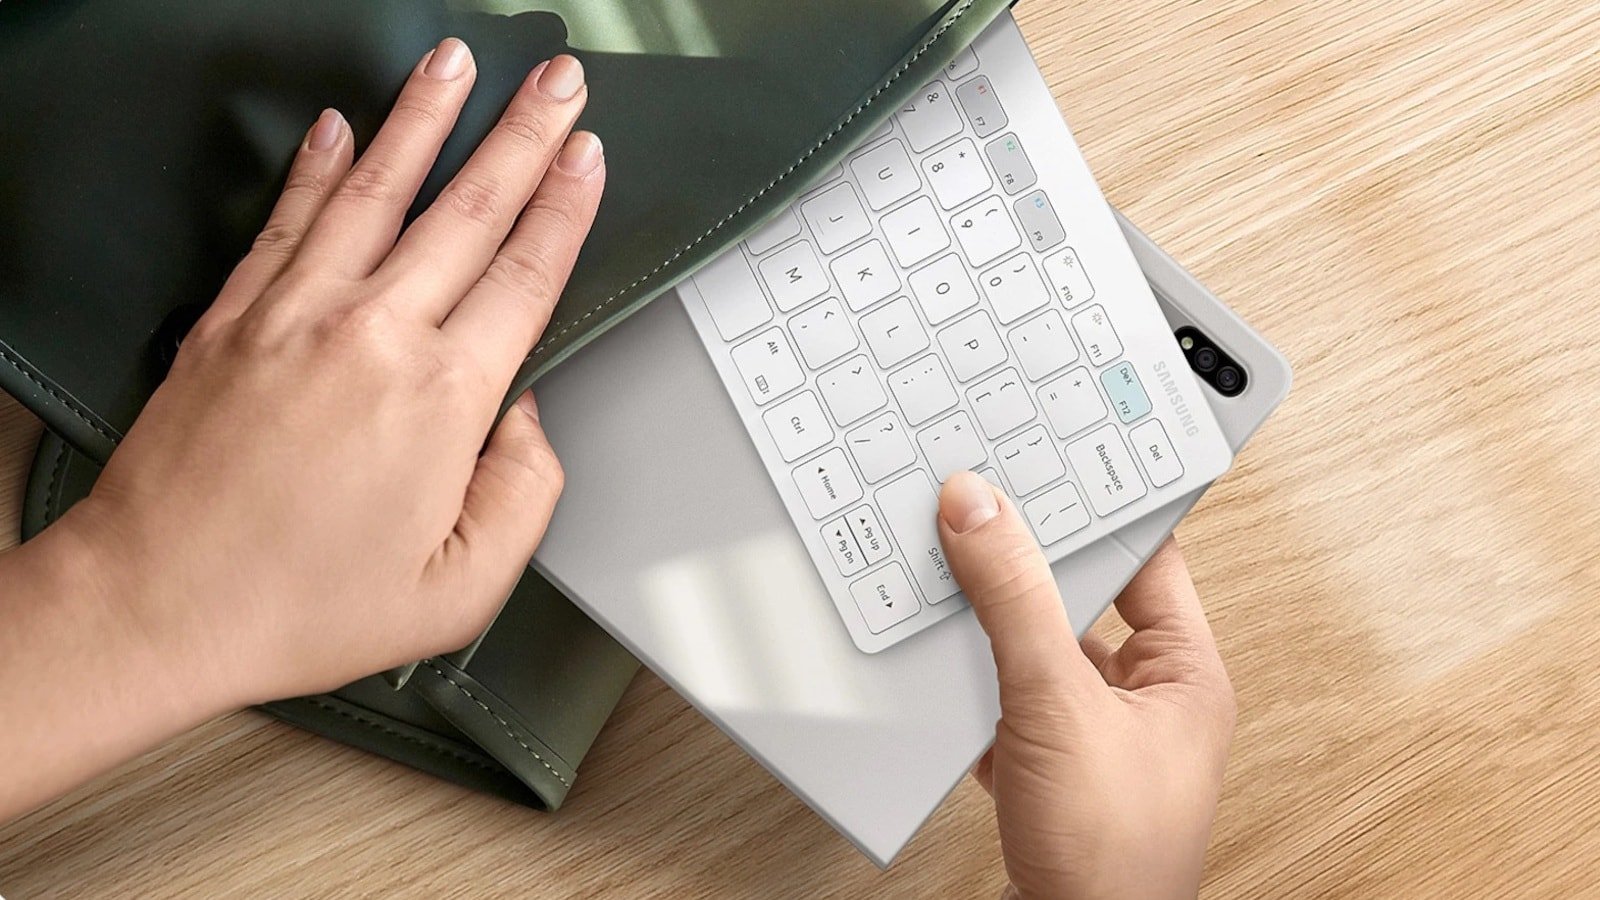 Samsung Smart Keyboard Trio 500 takes your workplace on the go